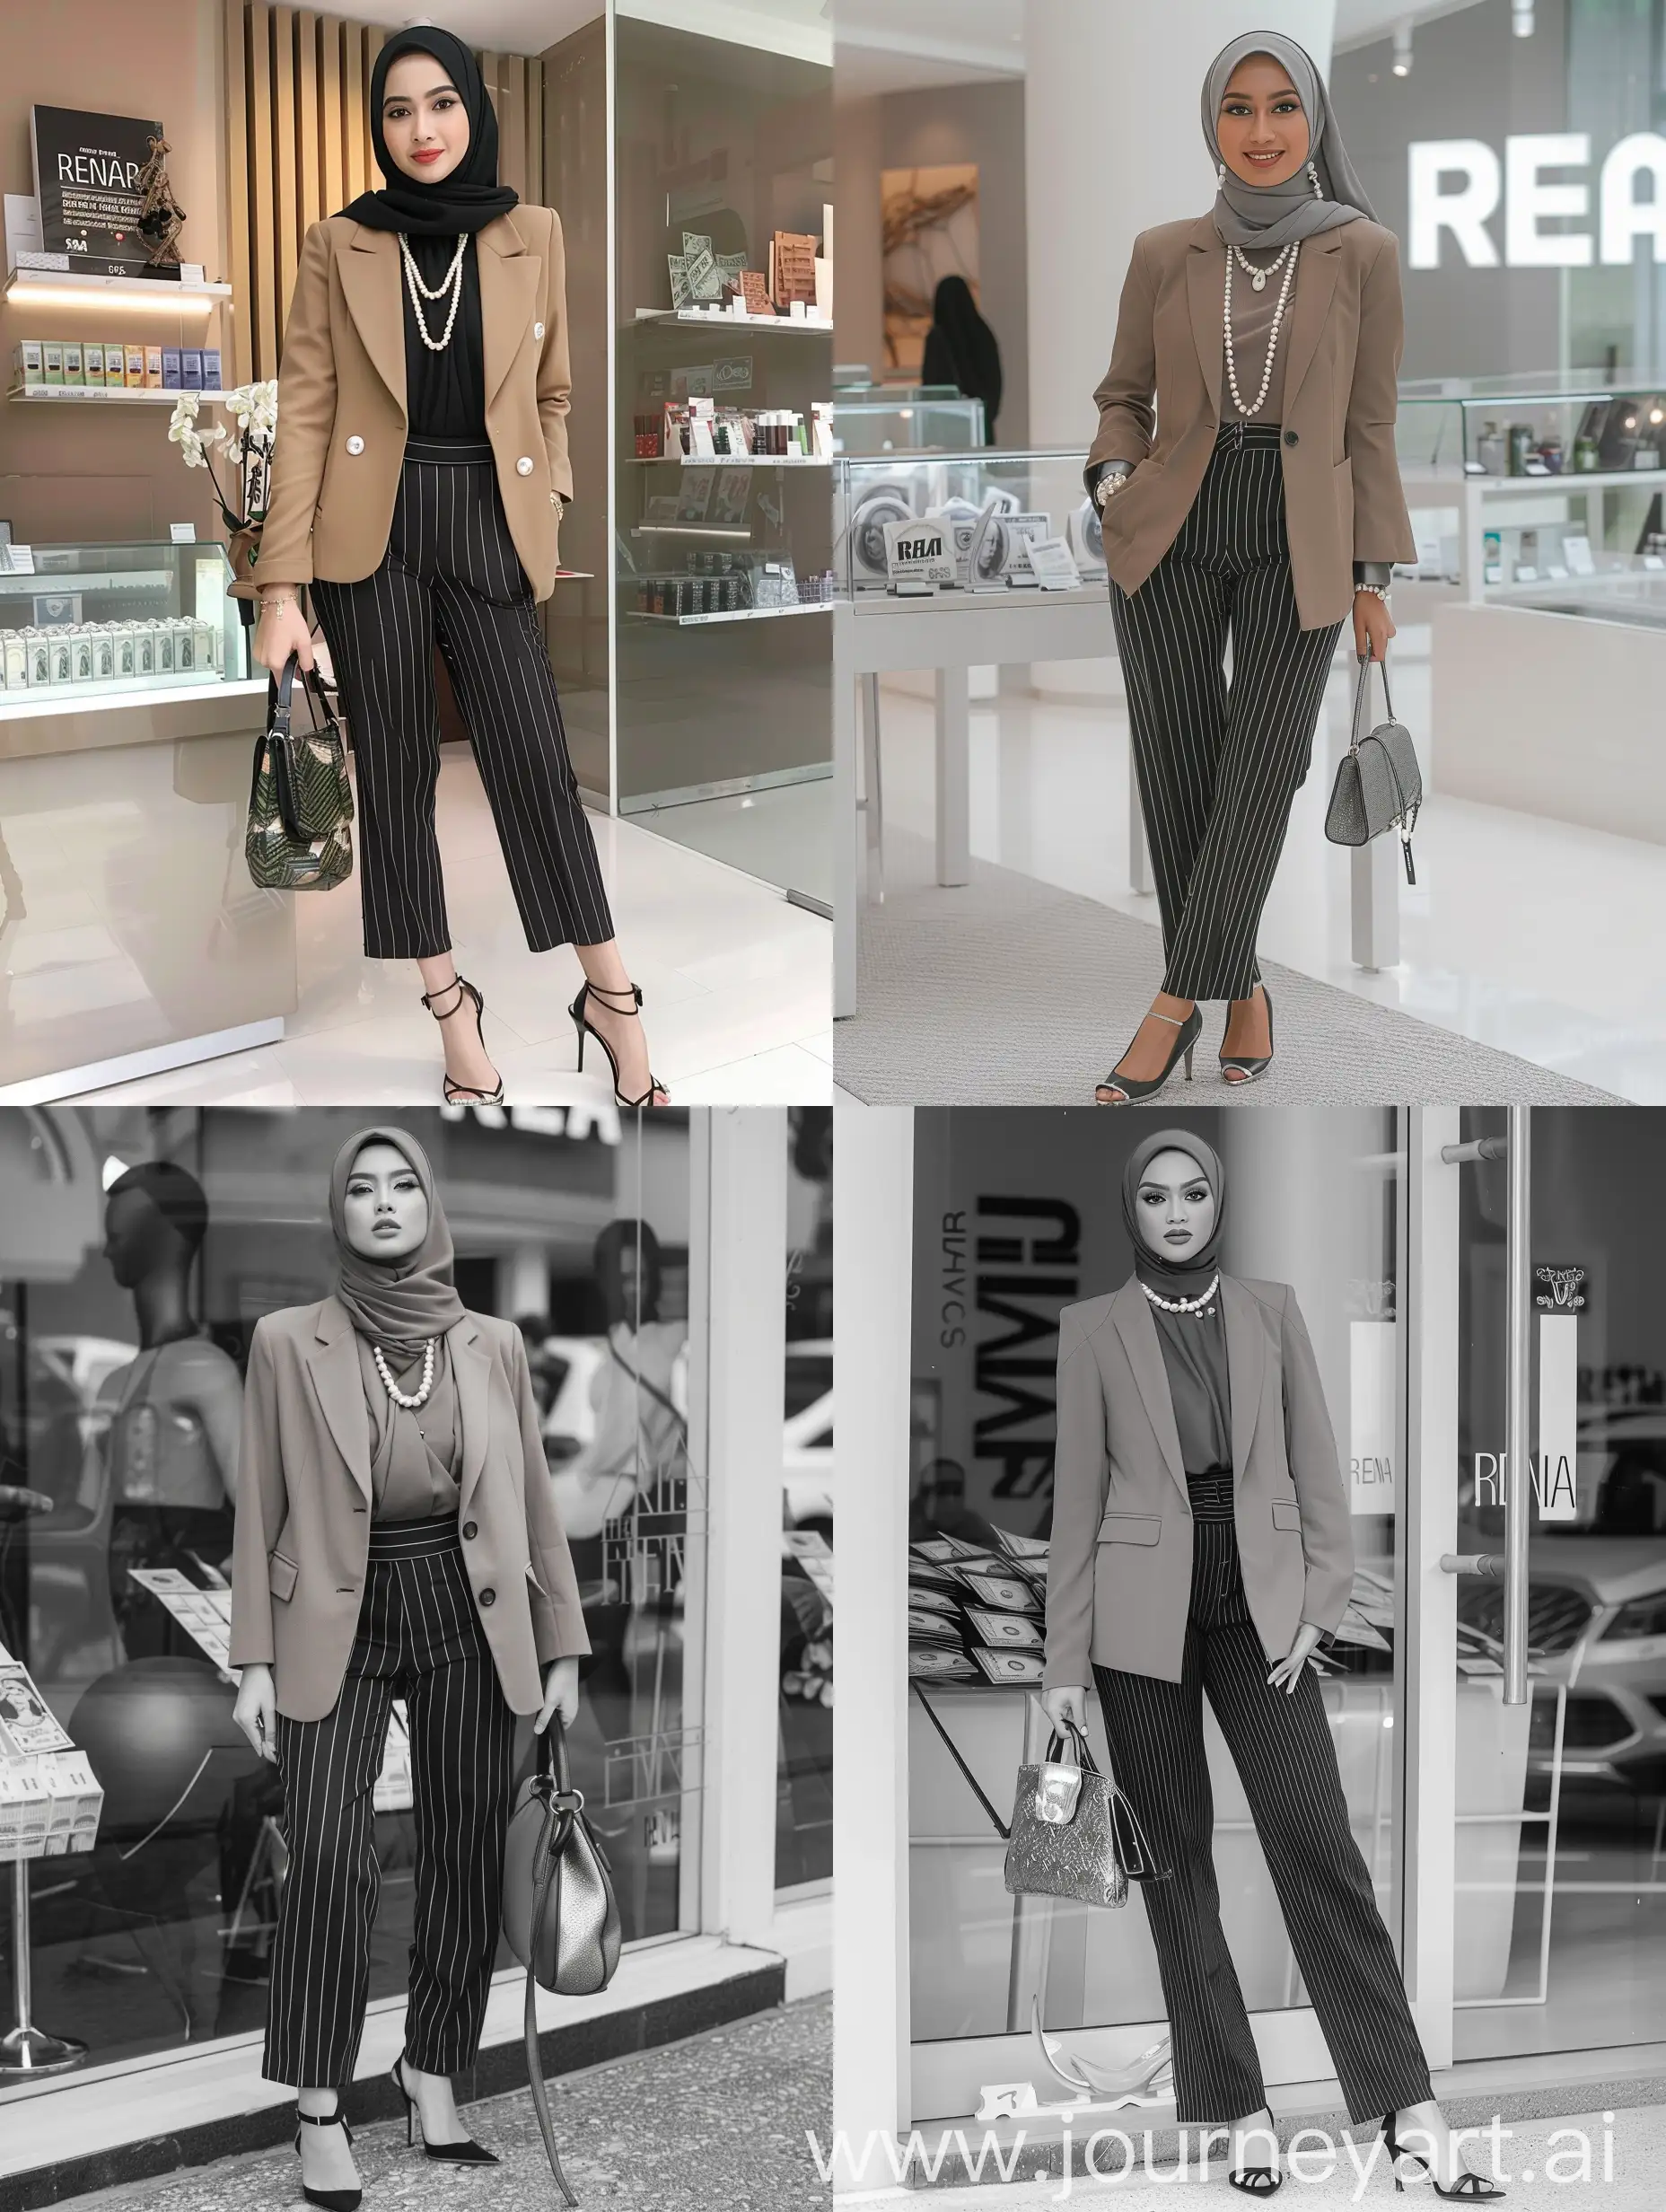 beautiful Indonesian hijab woman wearing a blazer and black striped women's pants, hight heels, pearl necklace and earrings, holding a handbag, she is standing in front of  the RENA shop money. 